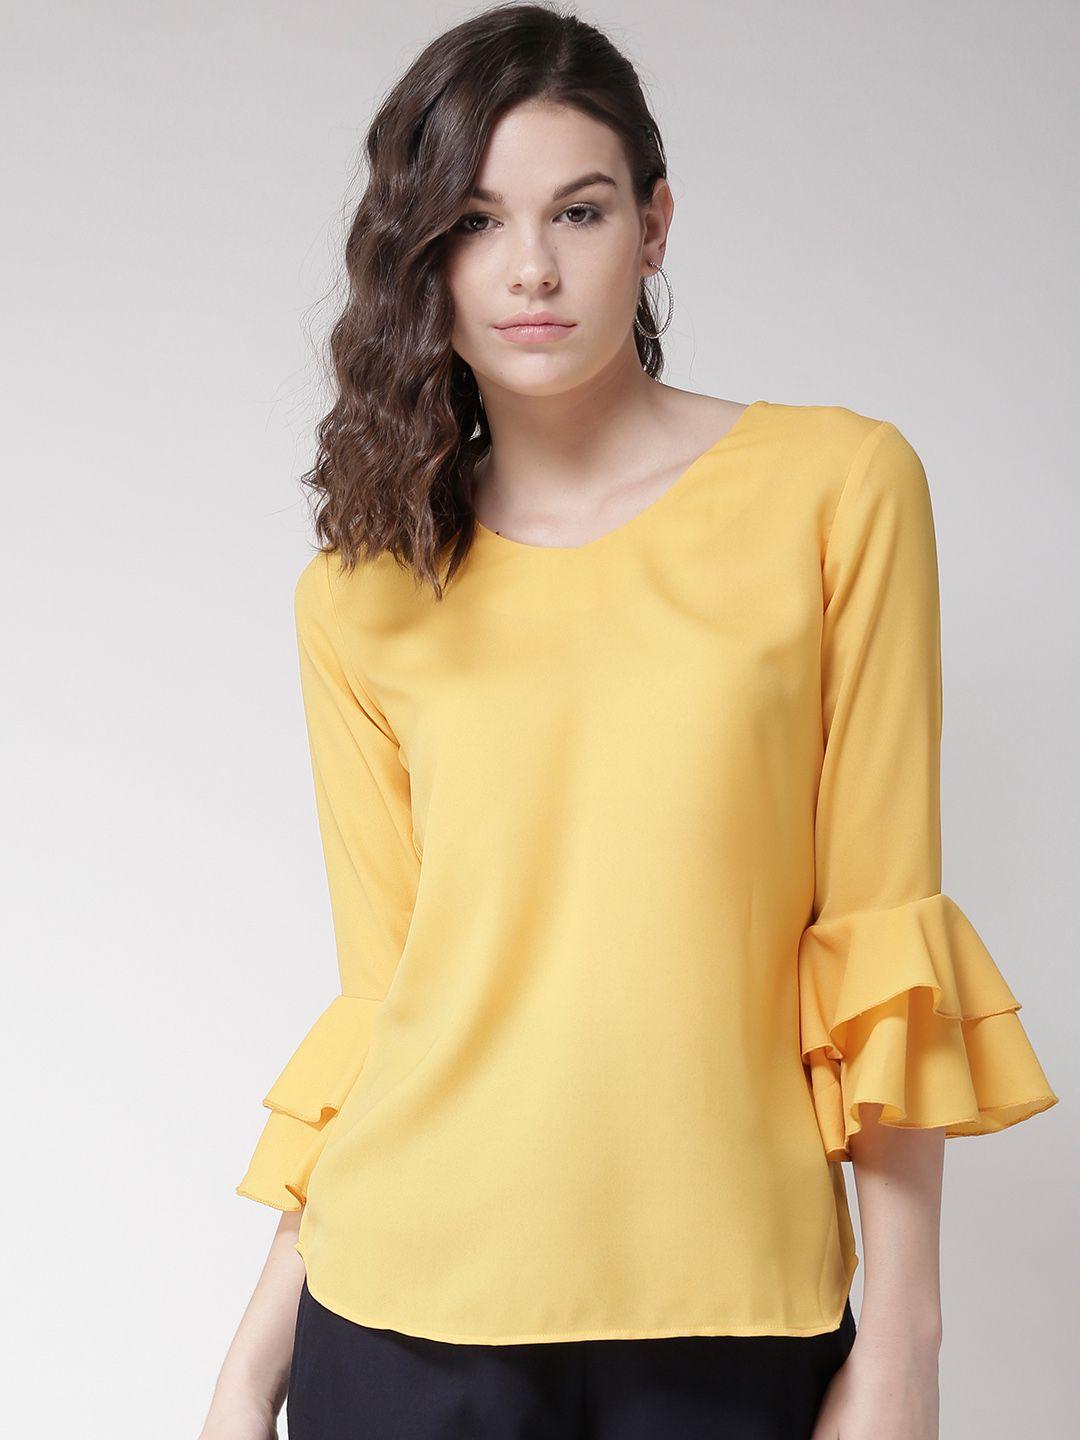 style-quotient-women-yellow-solid-top